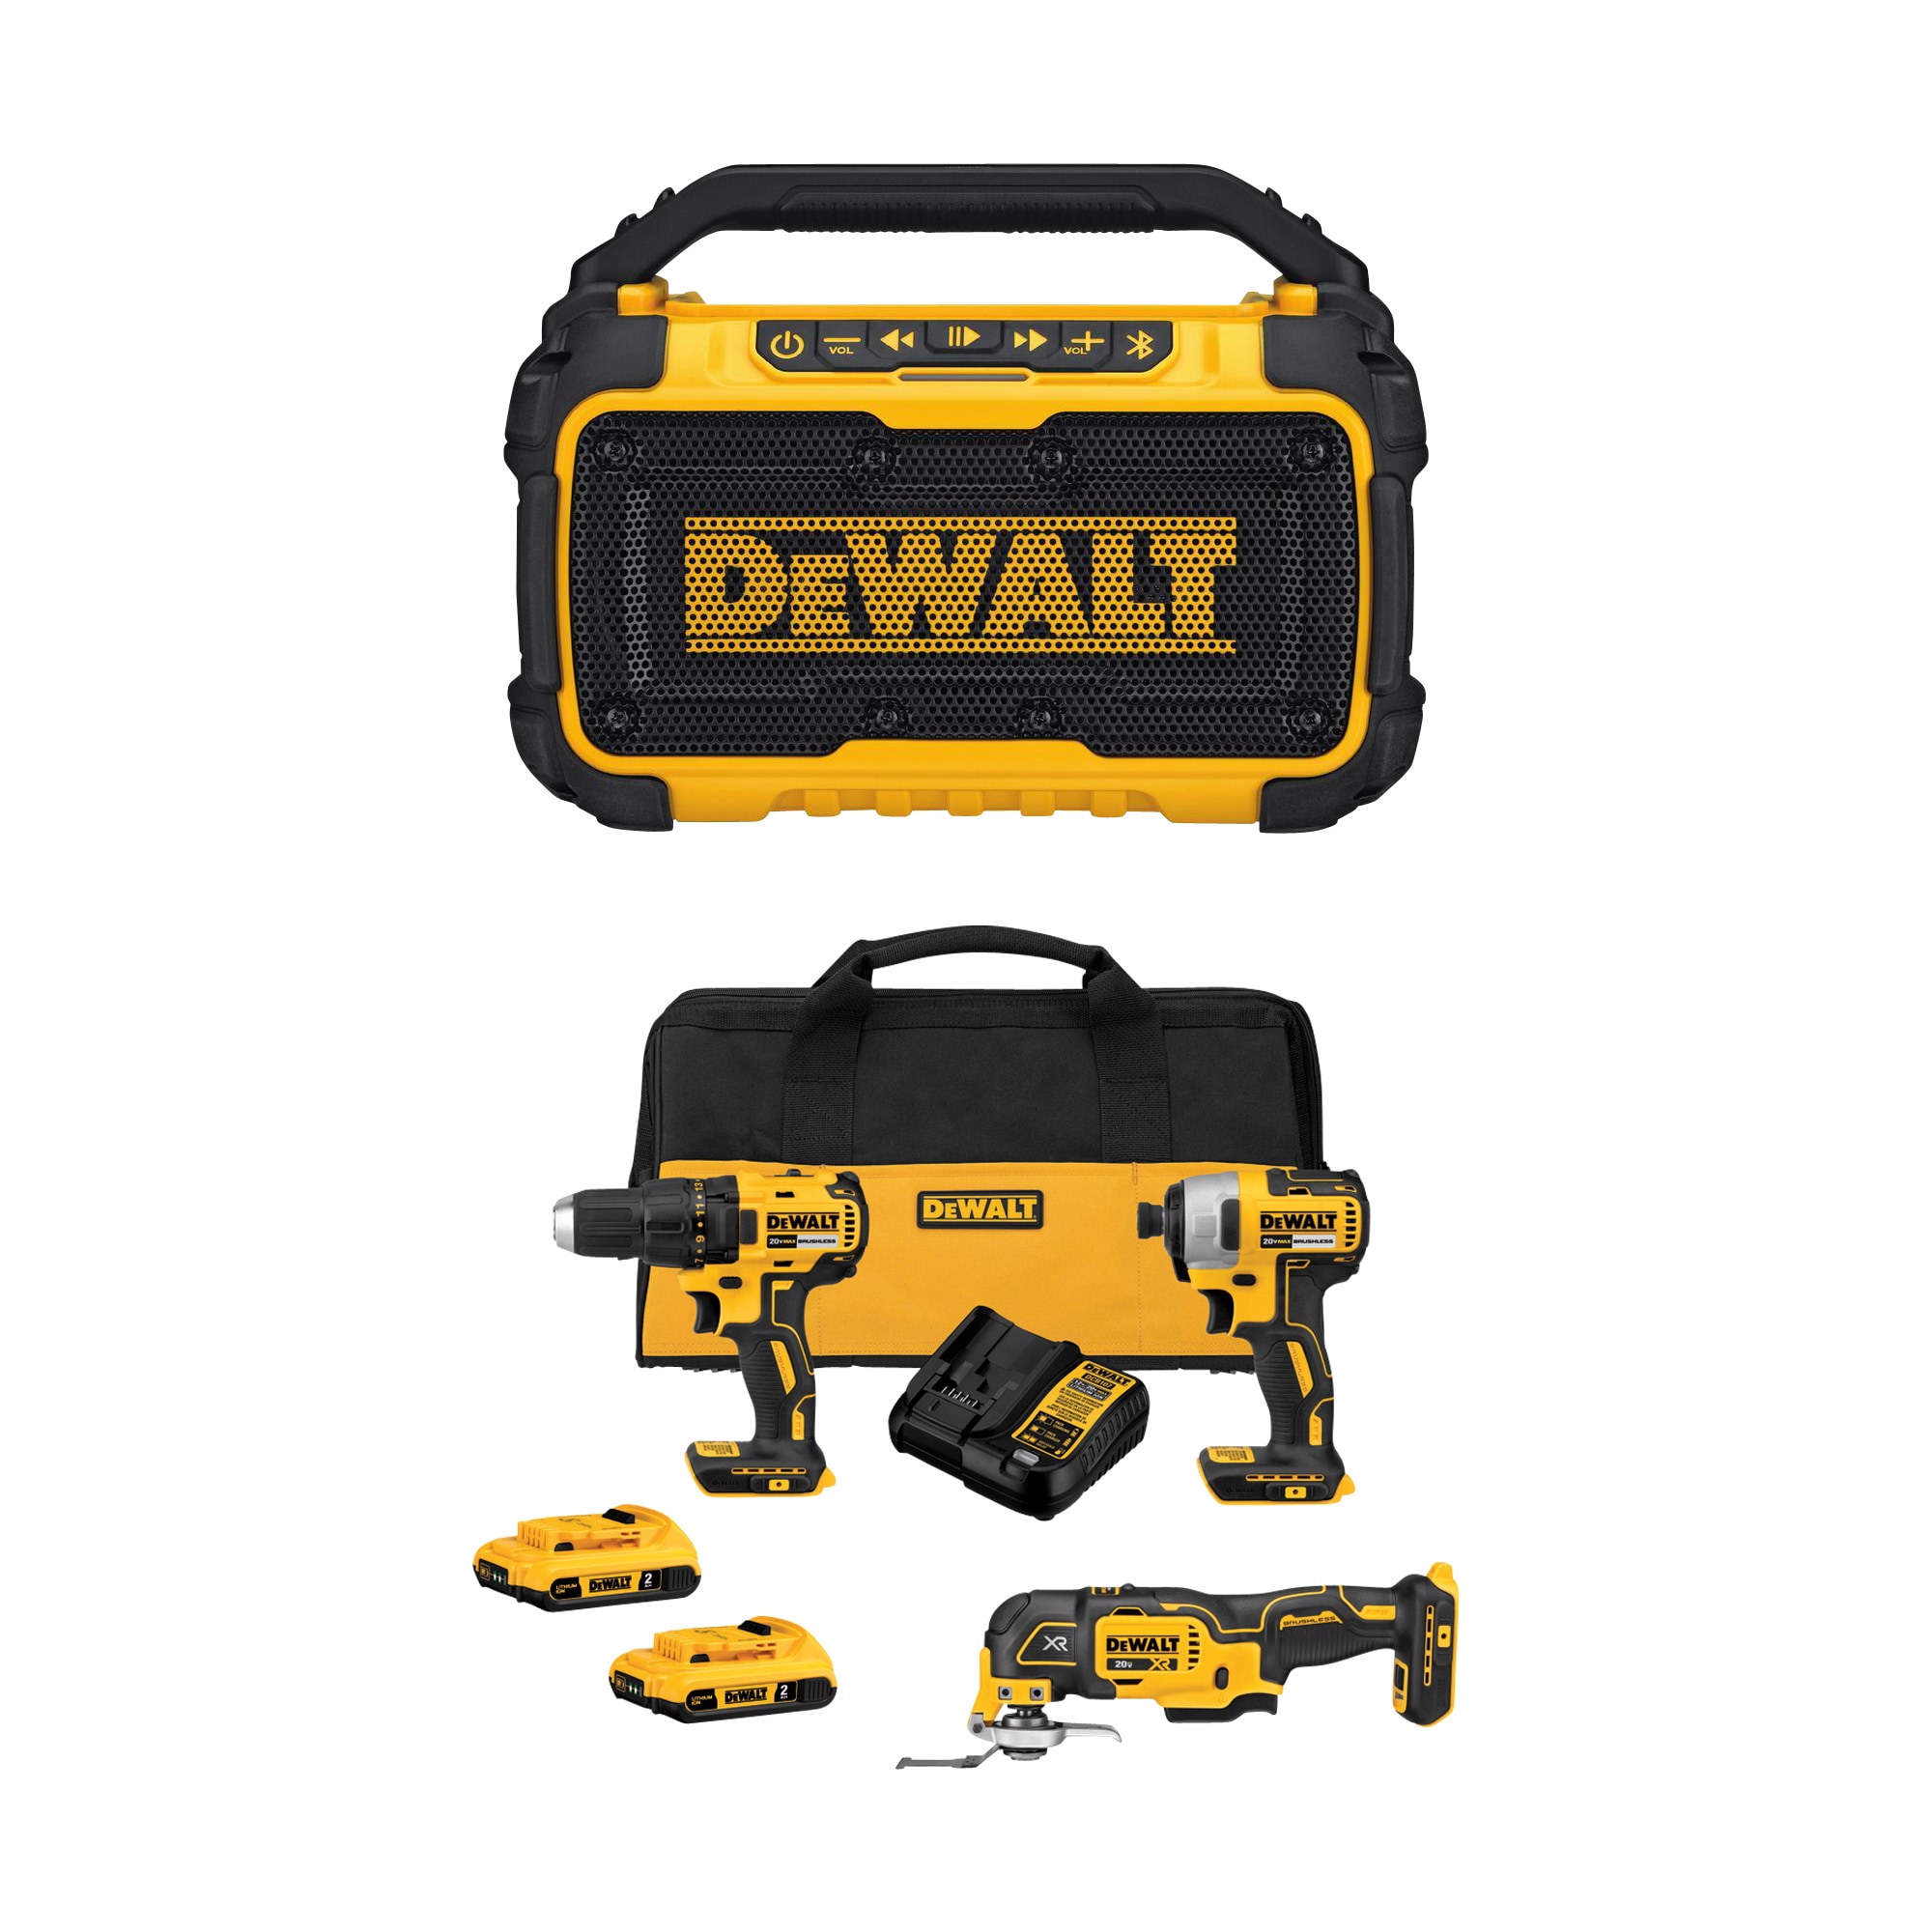 DEWALT 3-Tool 20-Volt Max Brushless Power Tool Combo Kit with Soft Case (2-Batteries and charger Included) & 12-Volt or 20-Volt Max Cordless Jobsite